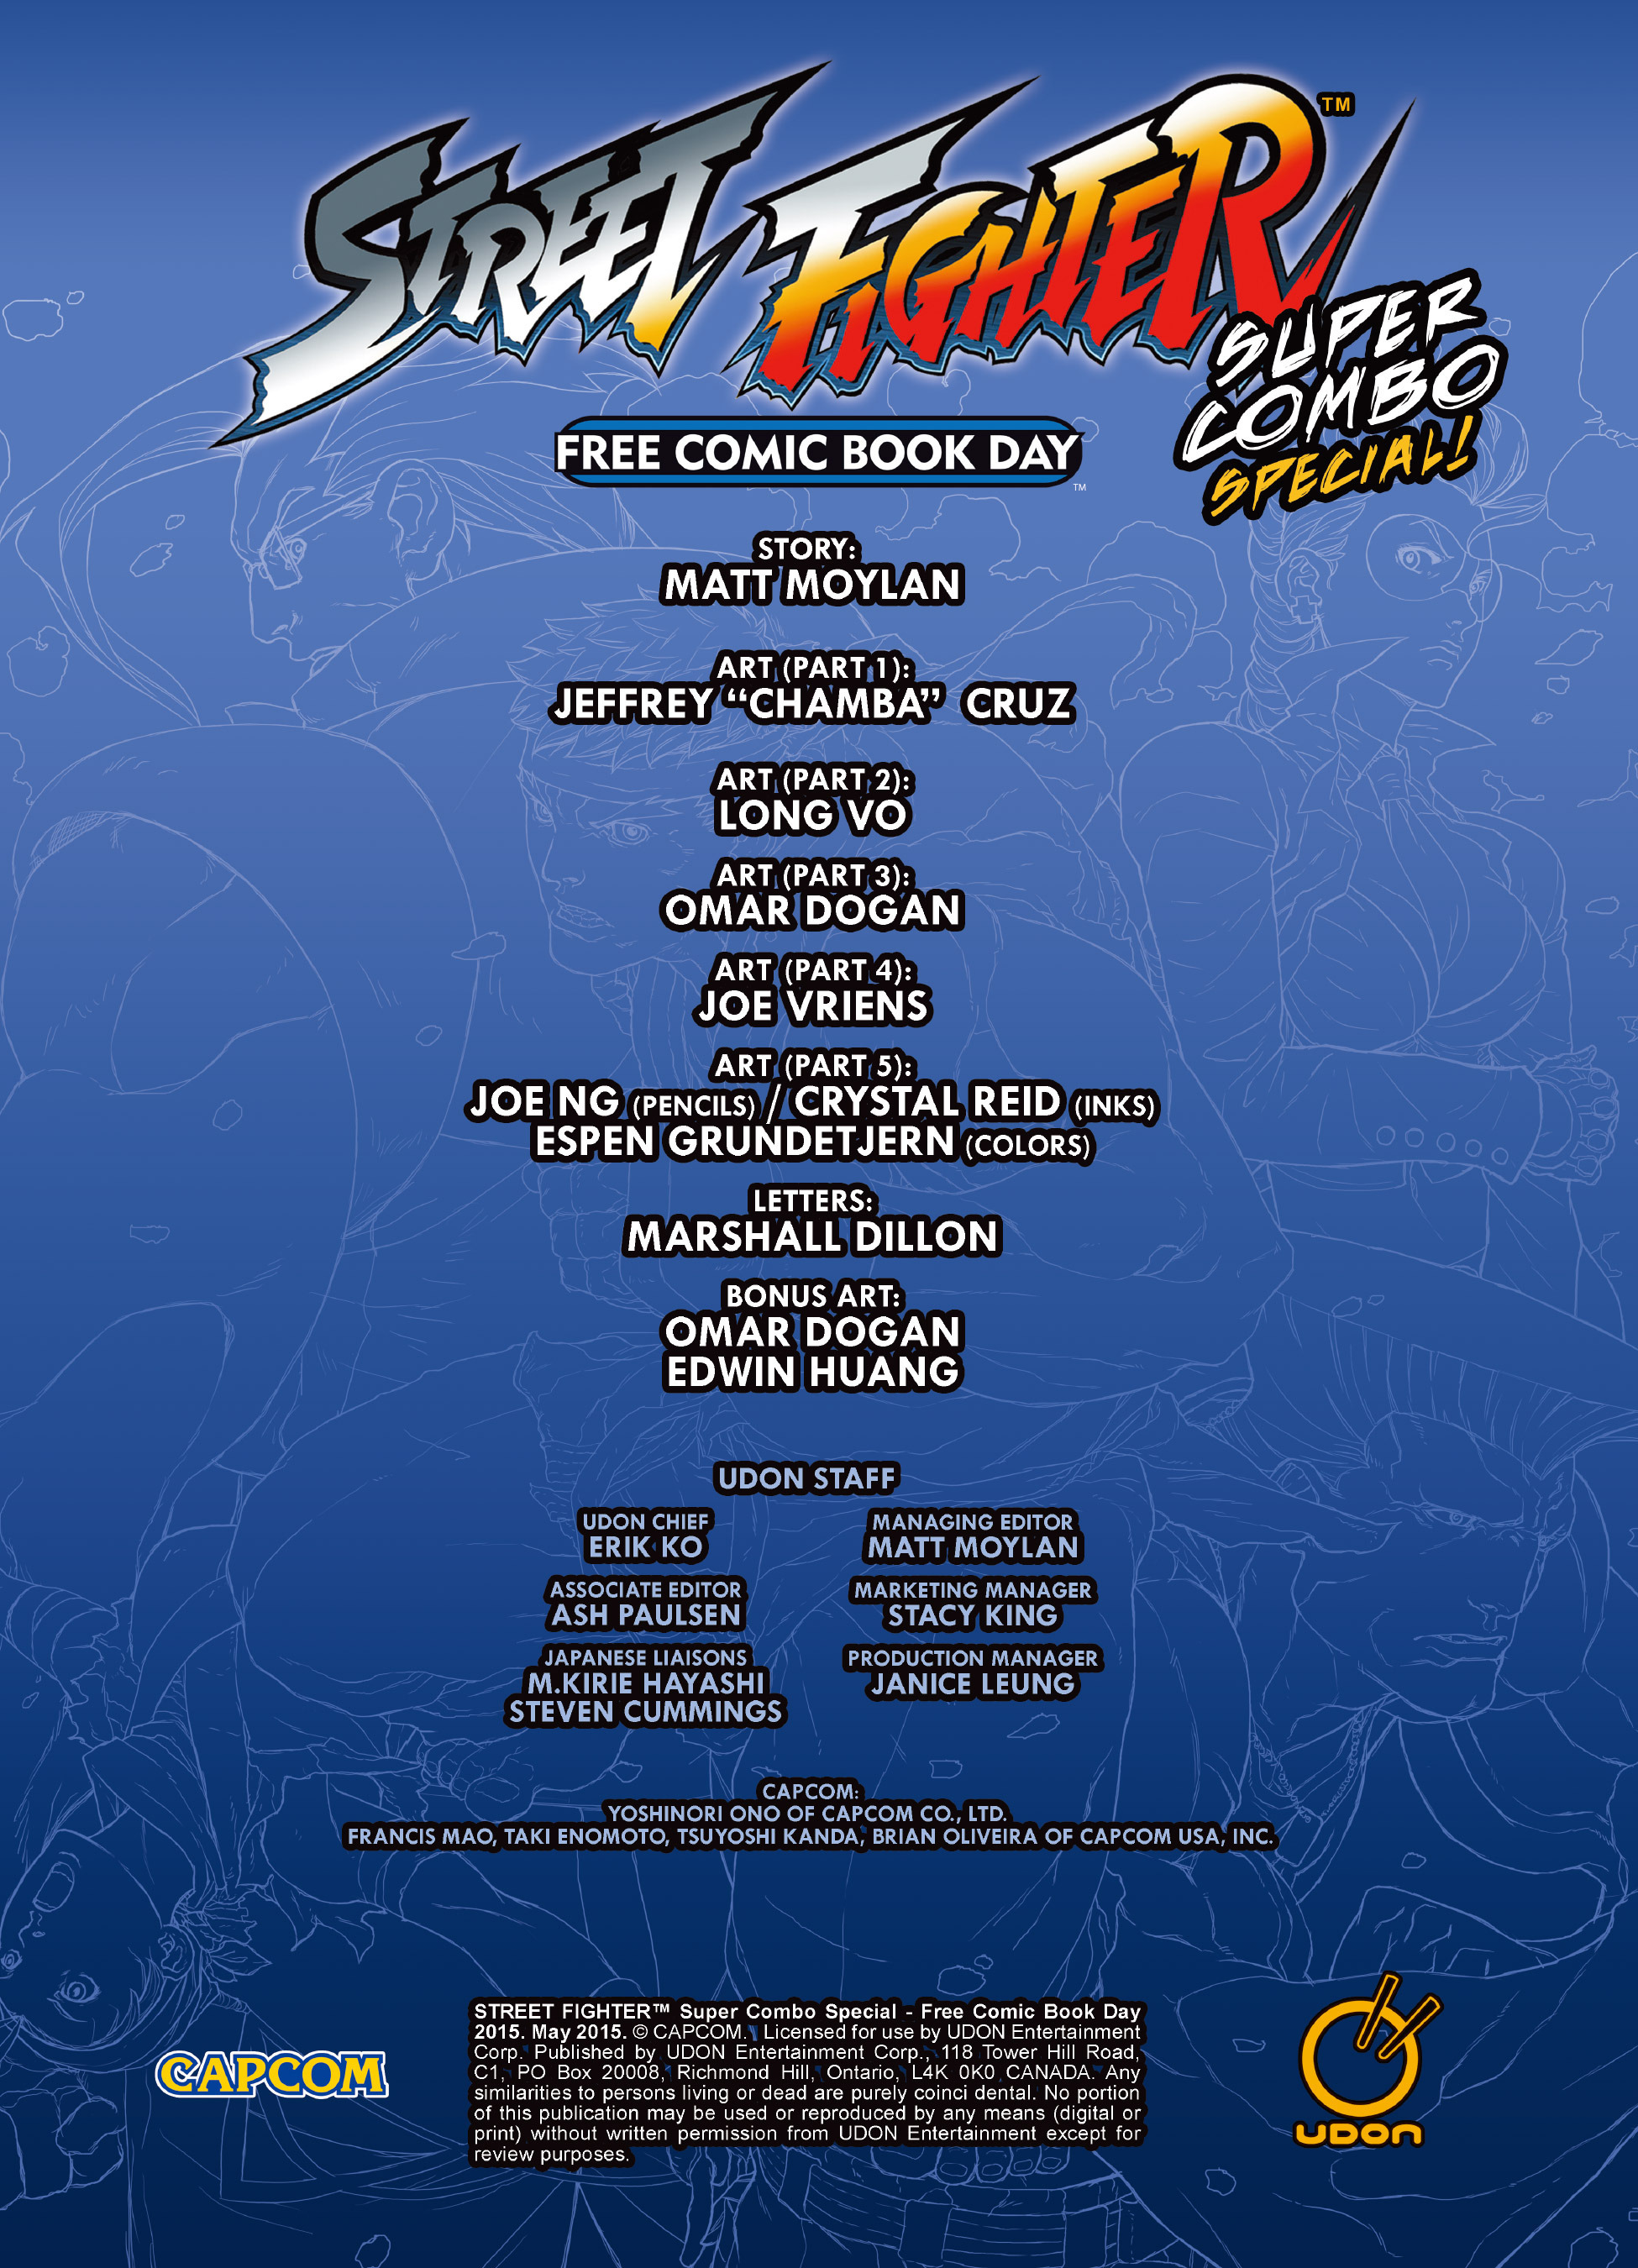 Read online Free Comic Book Day 2015 comic -  Issue # Street Fighter - Super Combo Special - 2